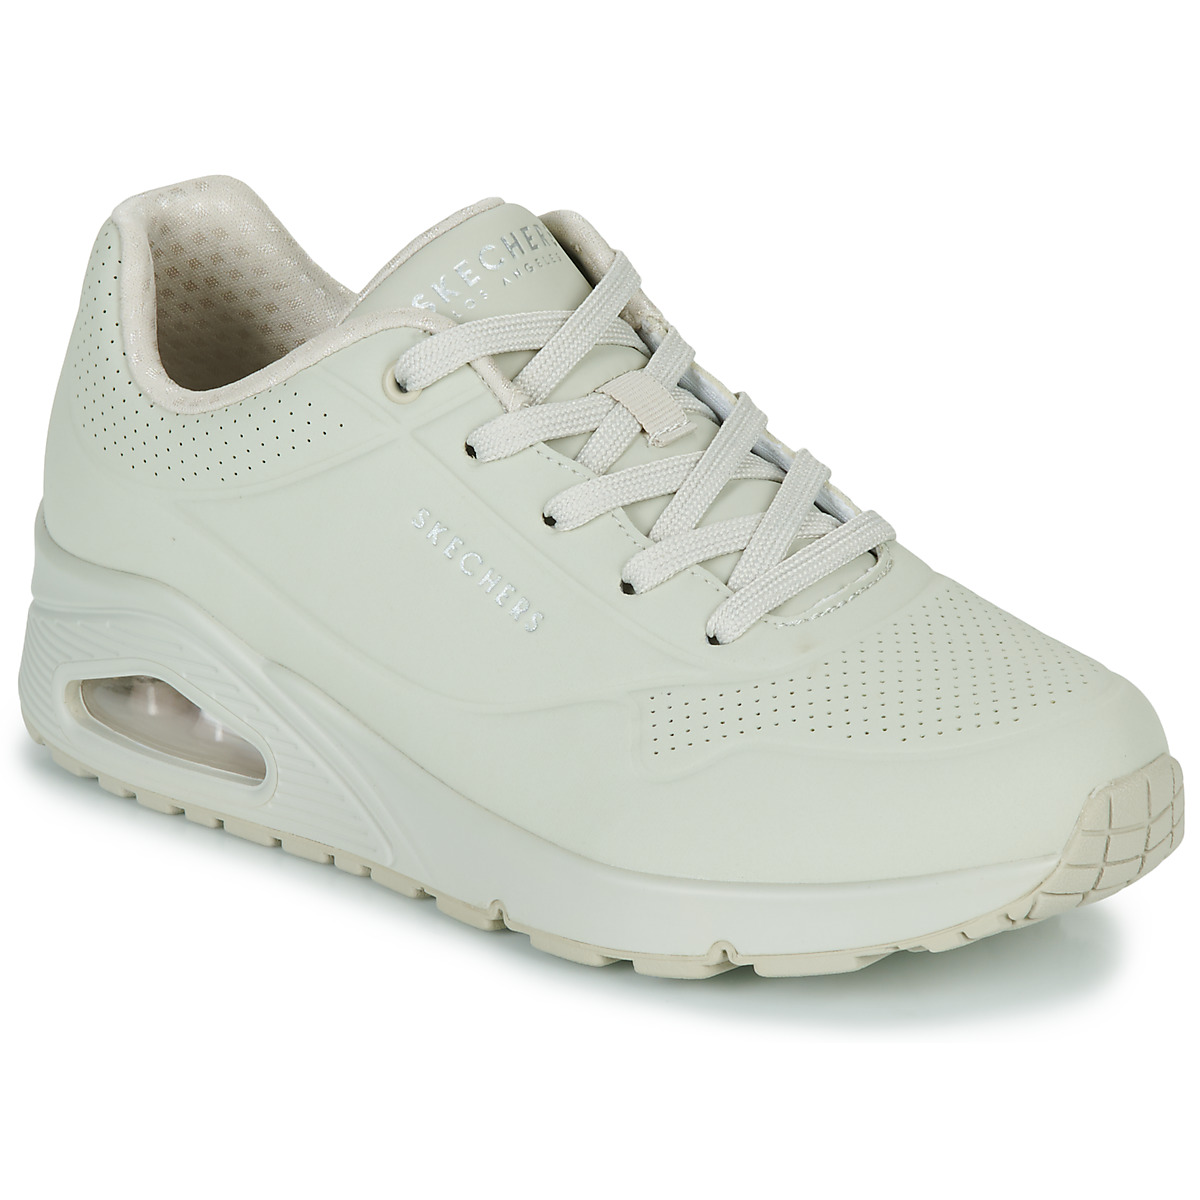 Shoes Women Low top trainers Skechers UNO - STAND ON AIR White